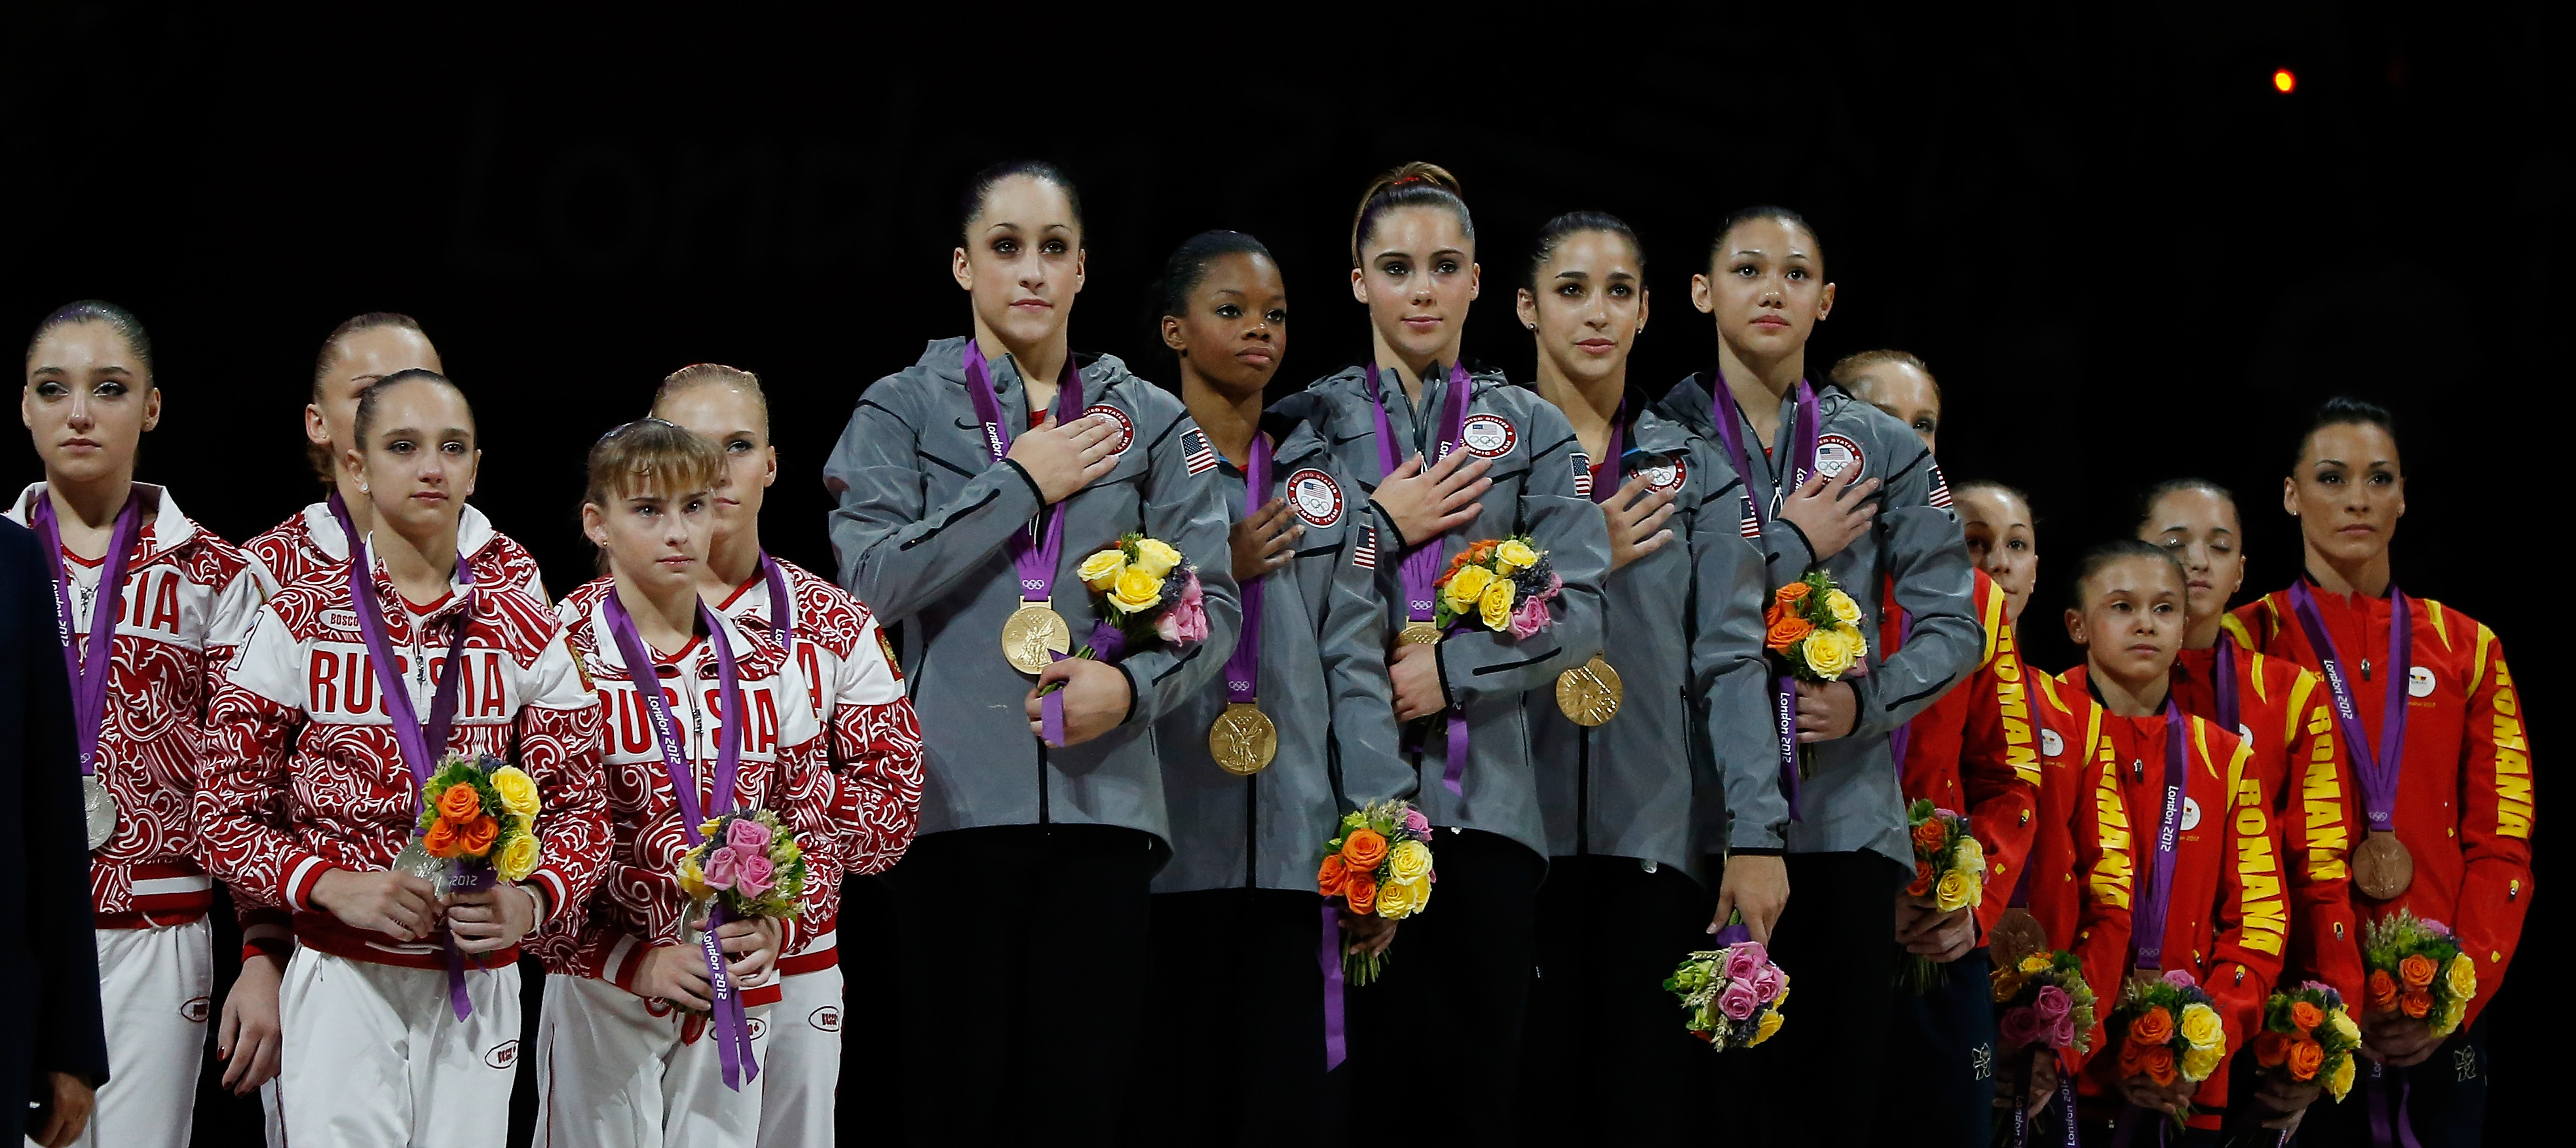 Silver medalists Russia, gold medalists United States with Aly Raisman second from right, and bronze medalists Romania pose of the podium after the Artistic Gymnastics Women's Team final on Day 4 of the London 2012 Olympic Games at North Greenwich Arena on July 31, 2012 in London. (Jamie Squire—Getty Images)